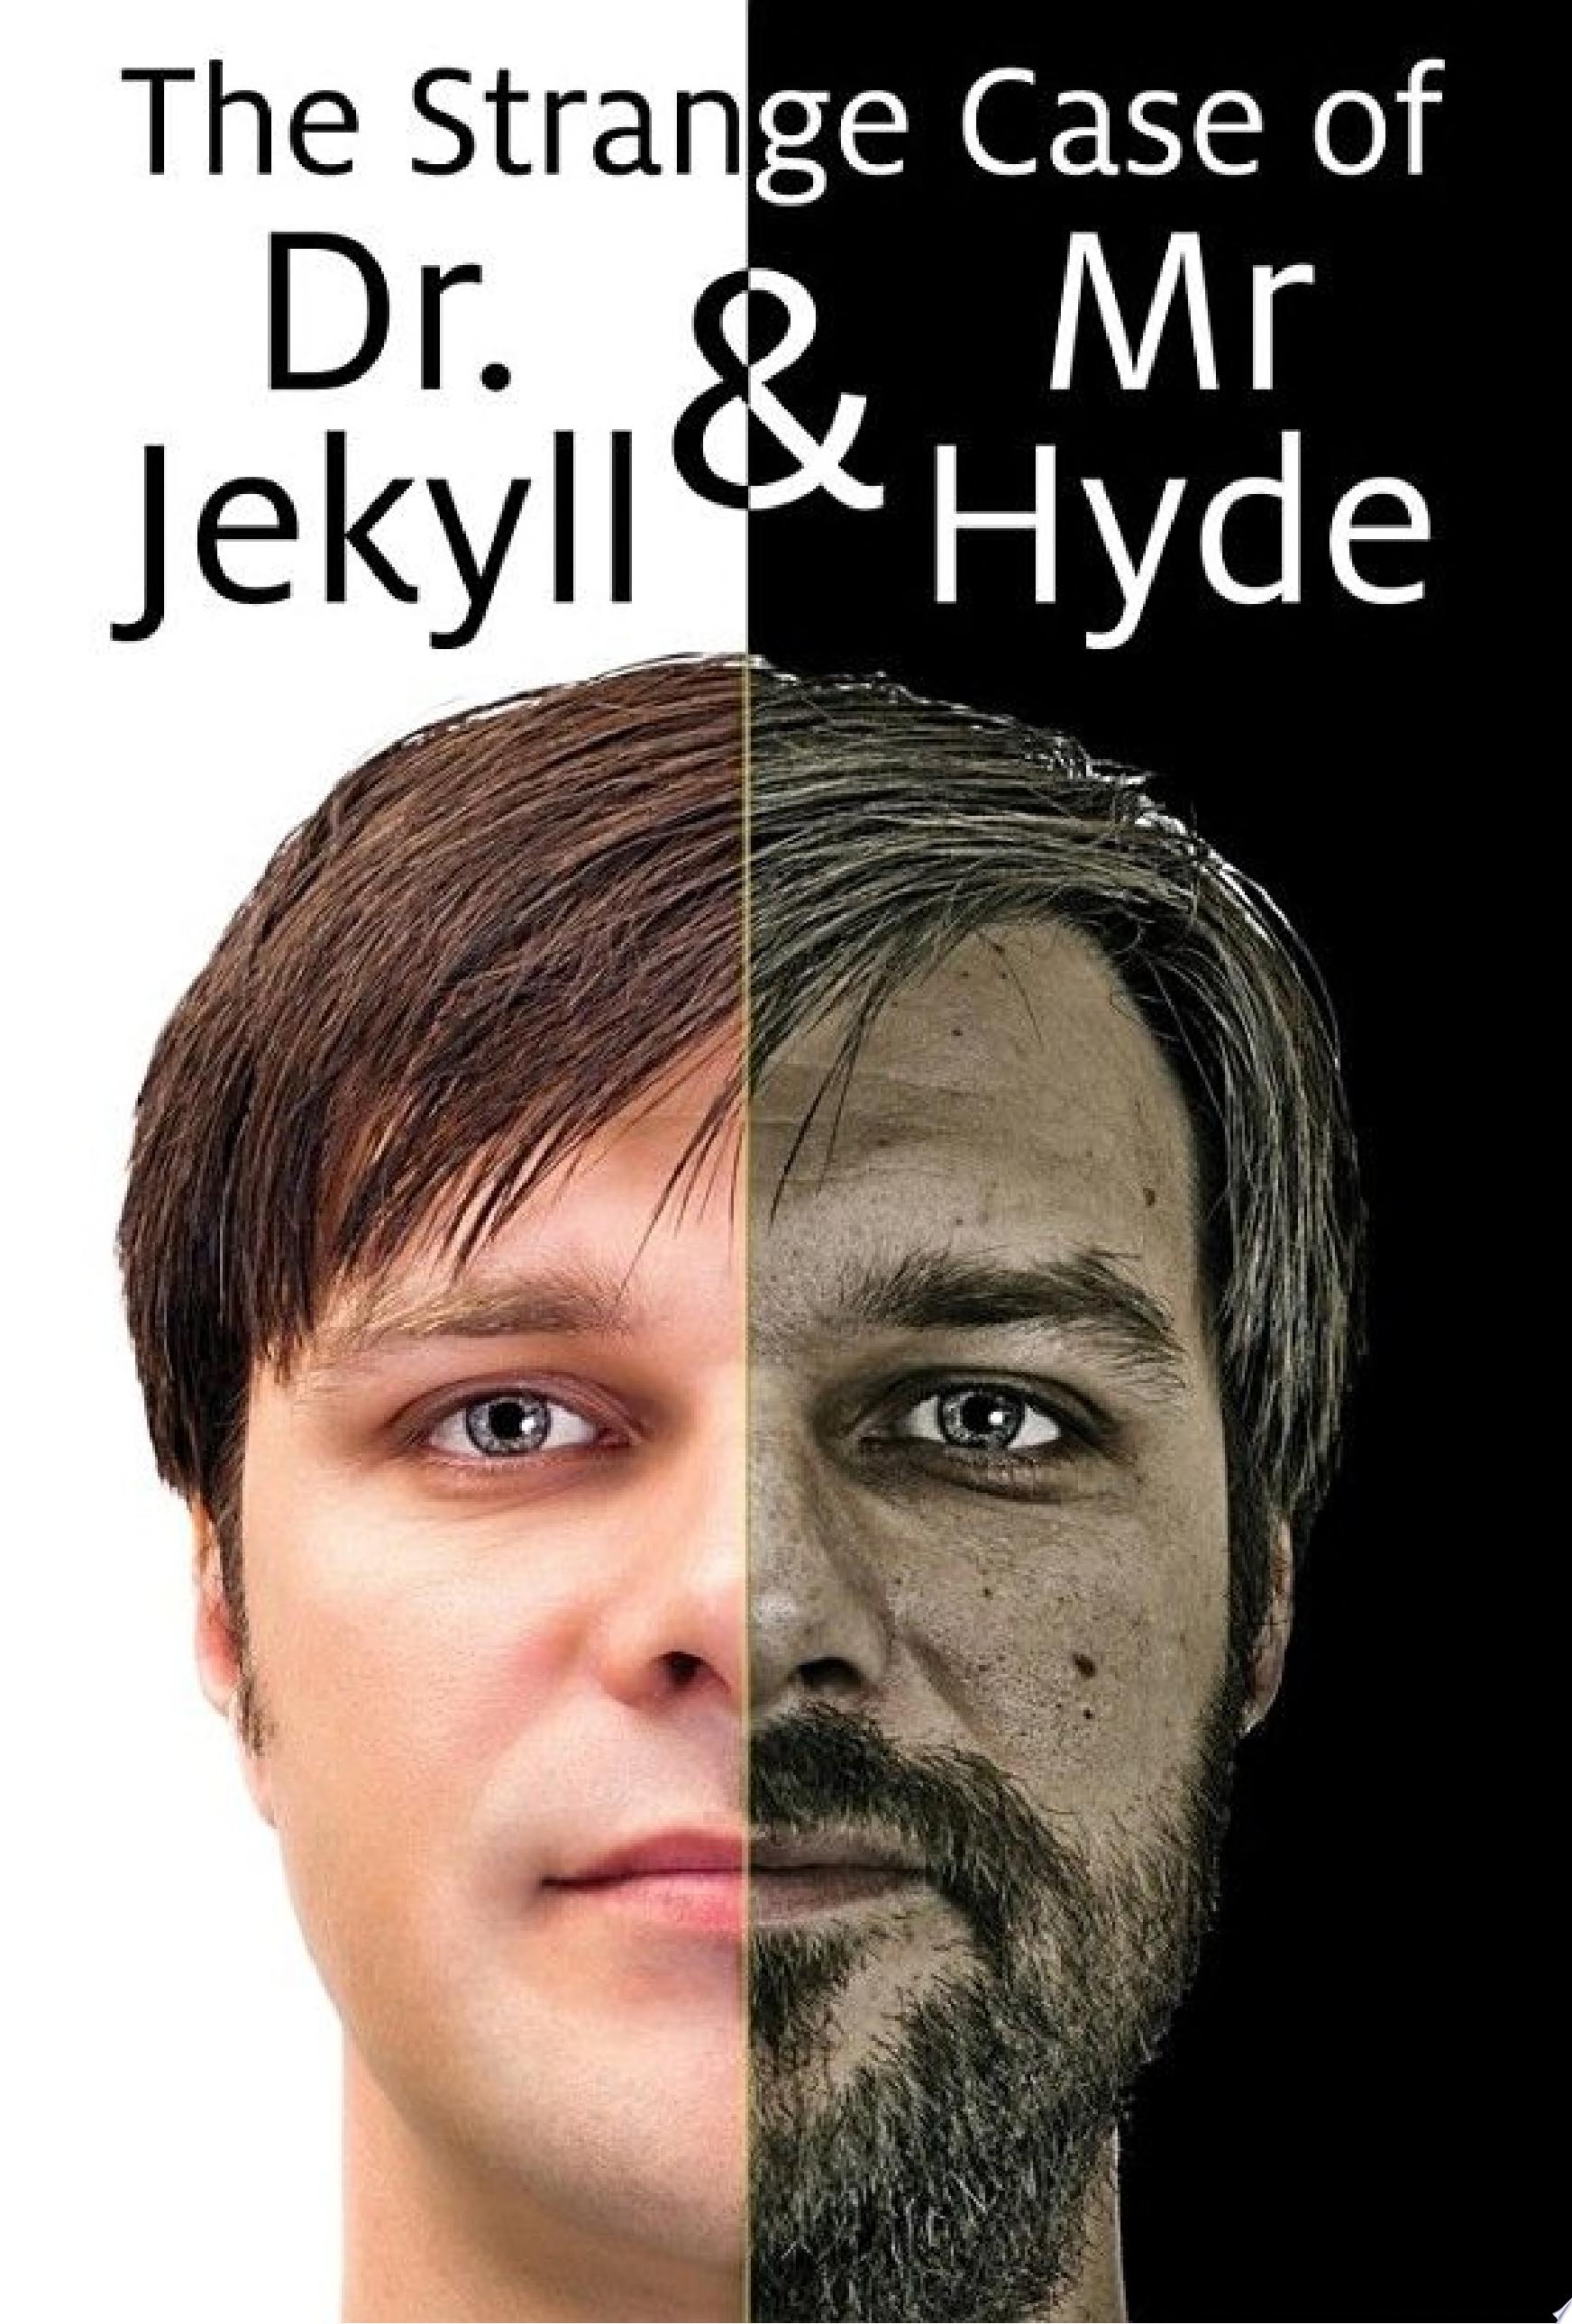 Image for "The Strange Case of Dr. Jekyll and Mr. Hyde"